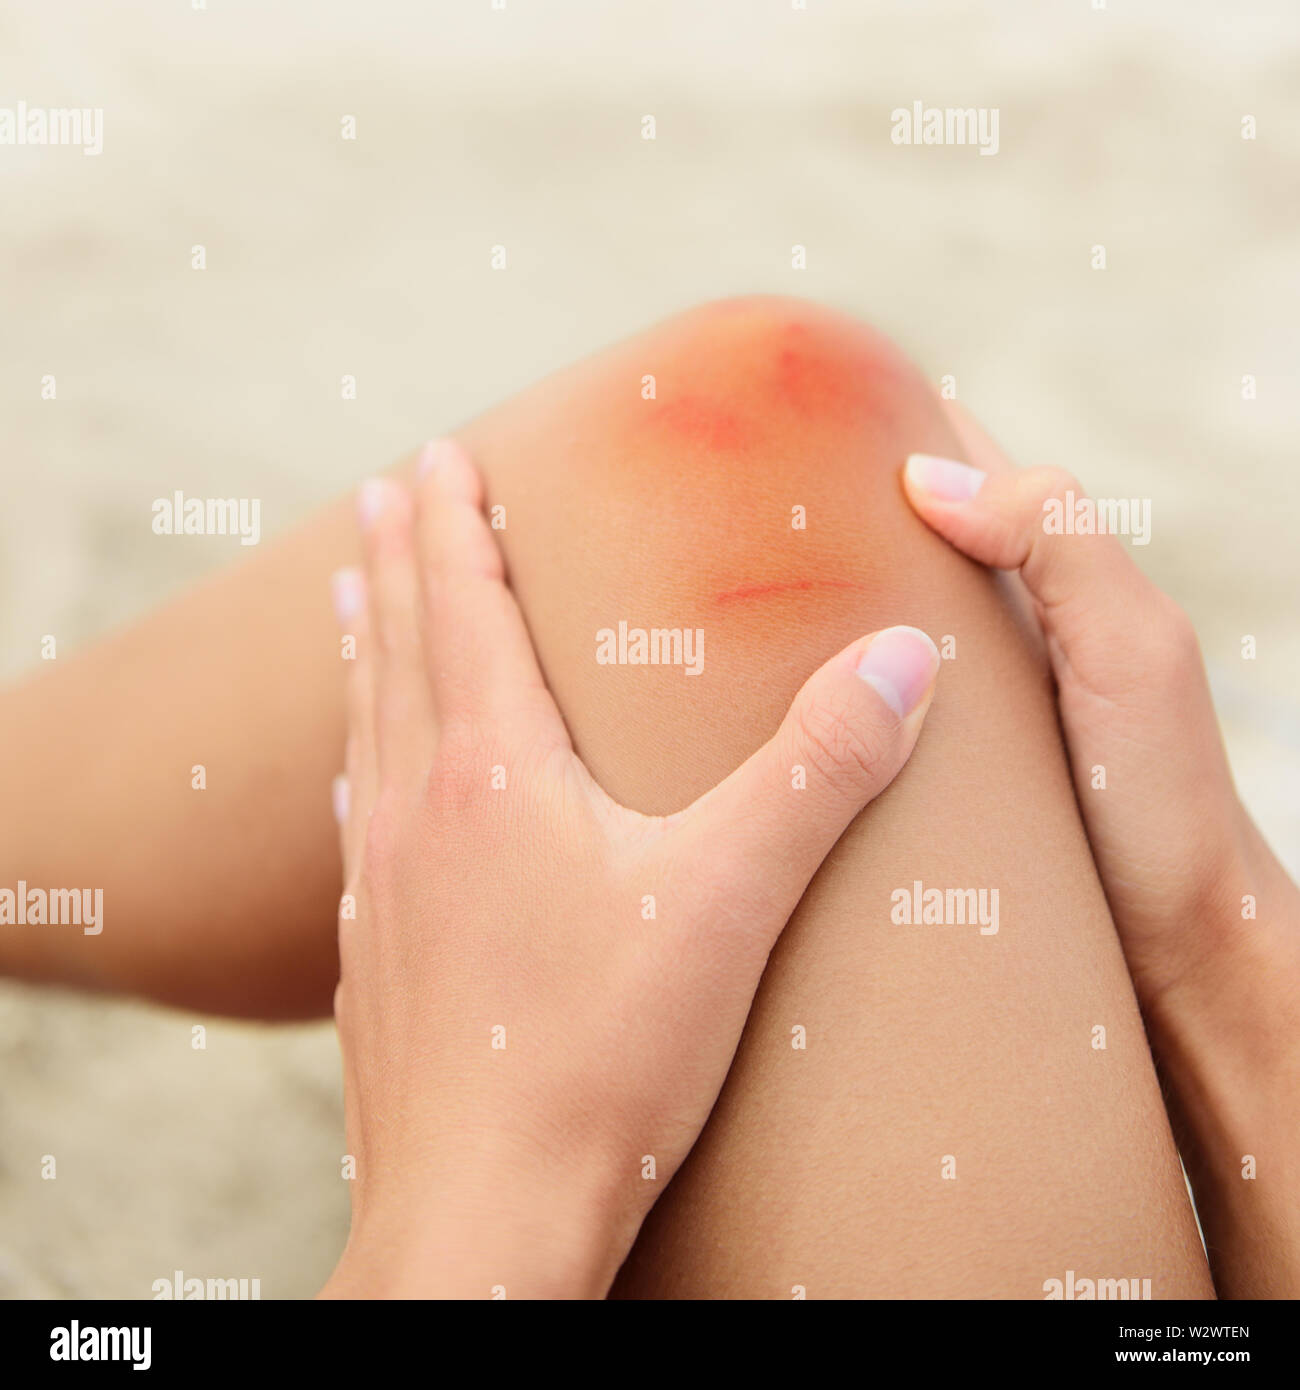 Woman nursing an injured bruised grazed knee with surface petechia on the skin and tissue discoloration in her hands in a healthcare and medical concept, close up of the joint and hands Stock Photo